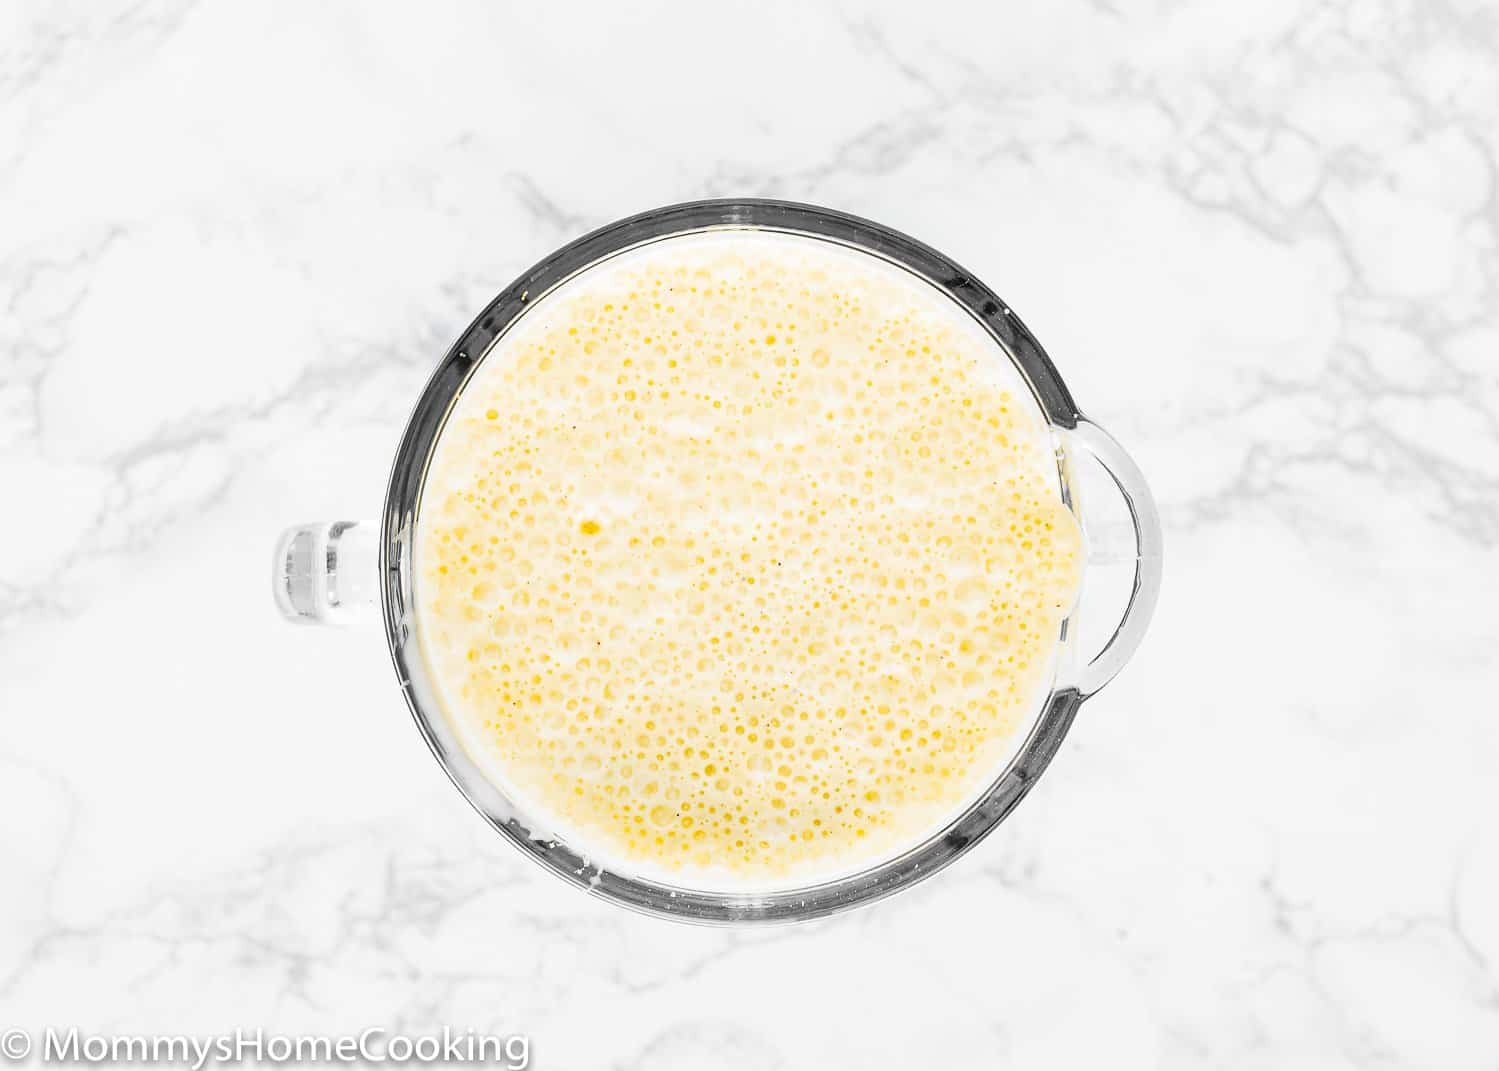 ponche crema ingredients in a blender.